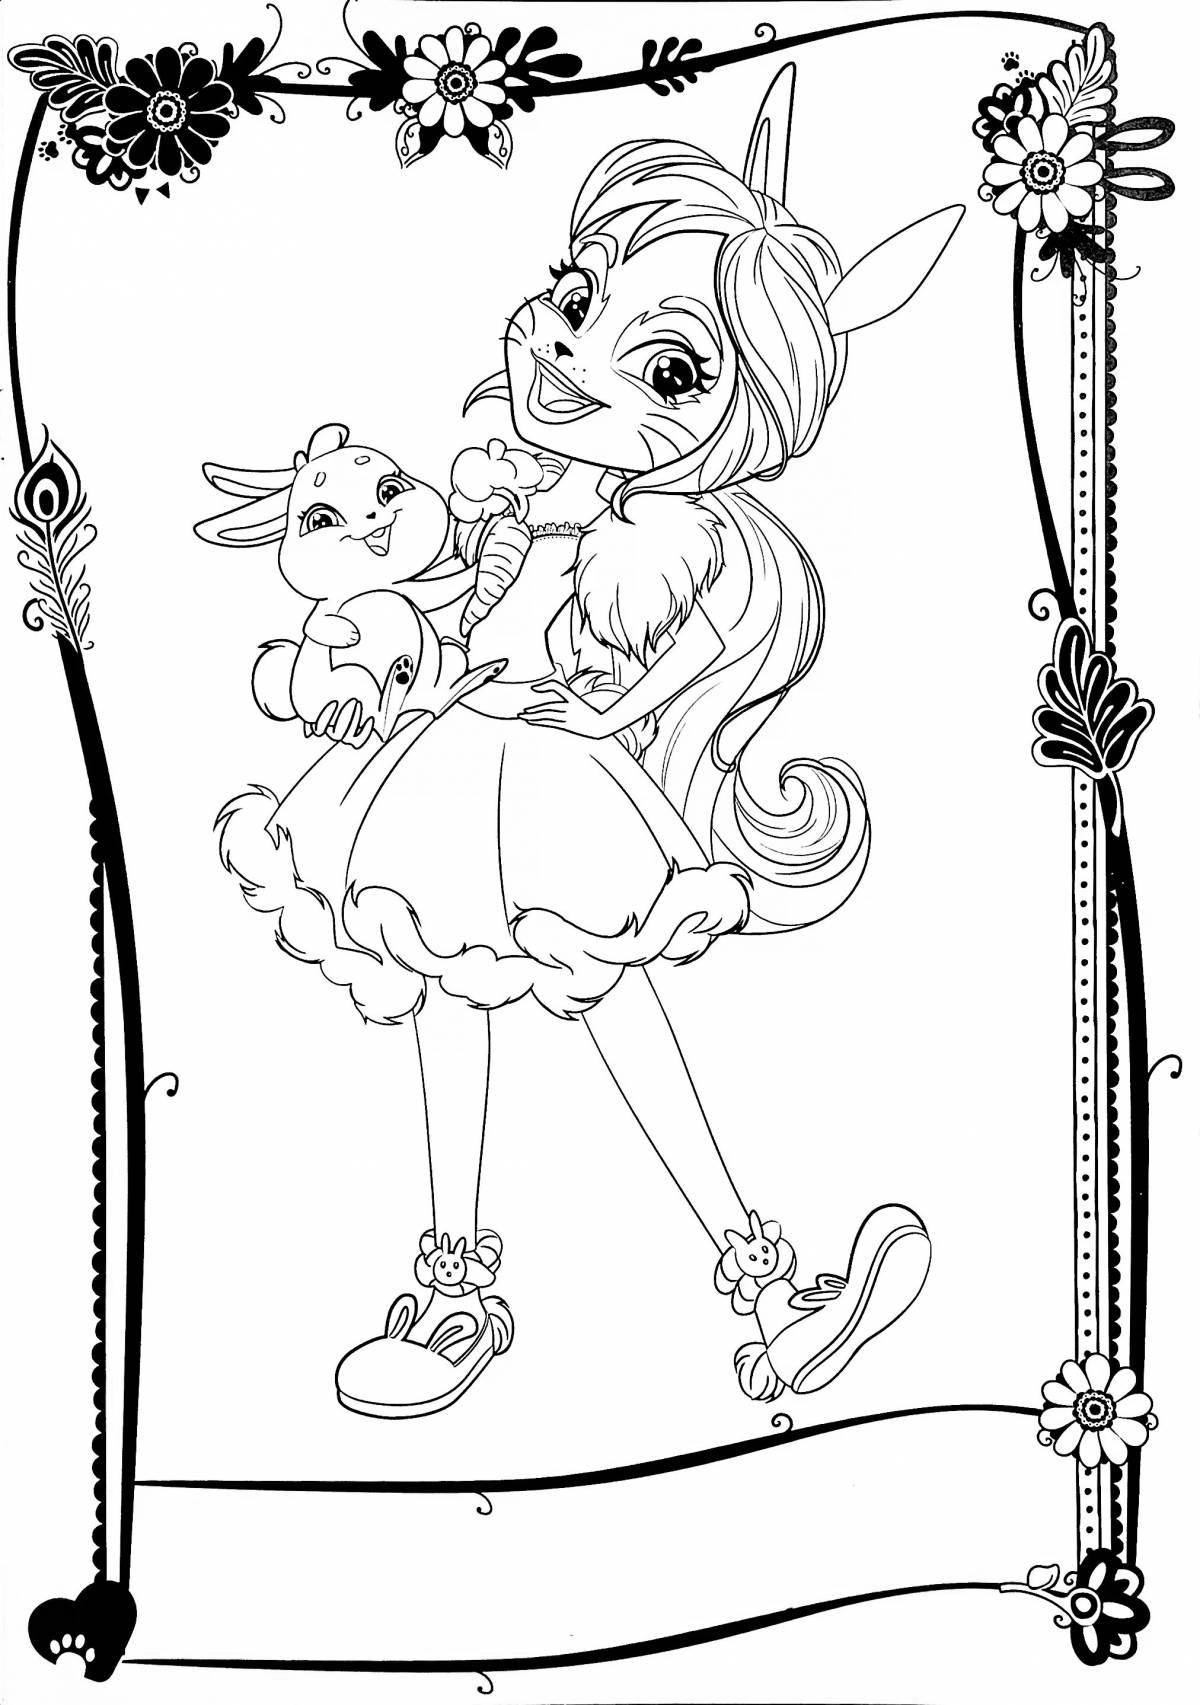 Color-zany enchimals coloring page